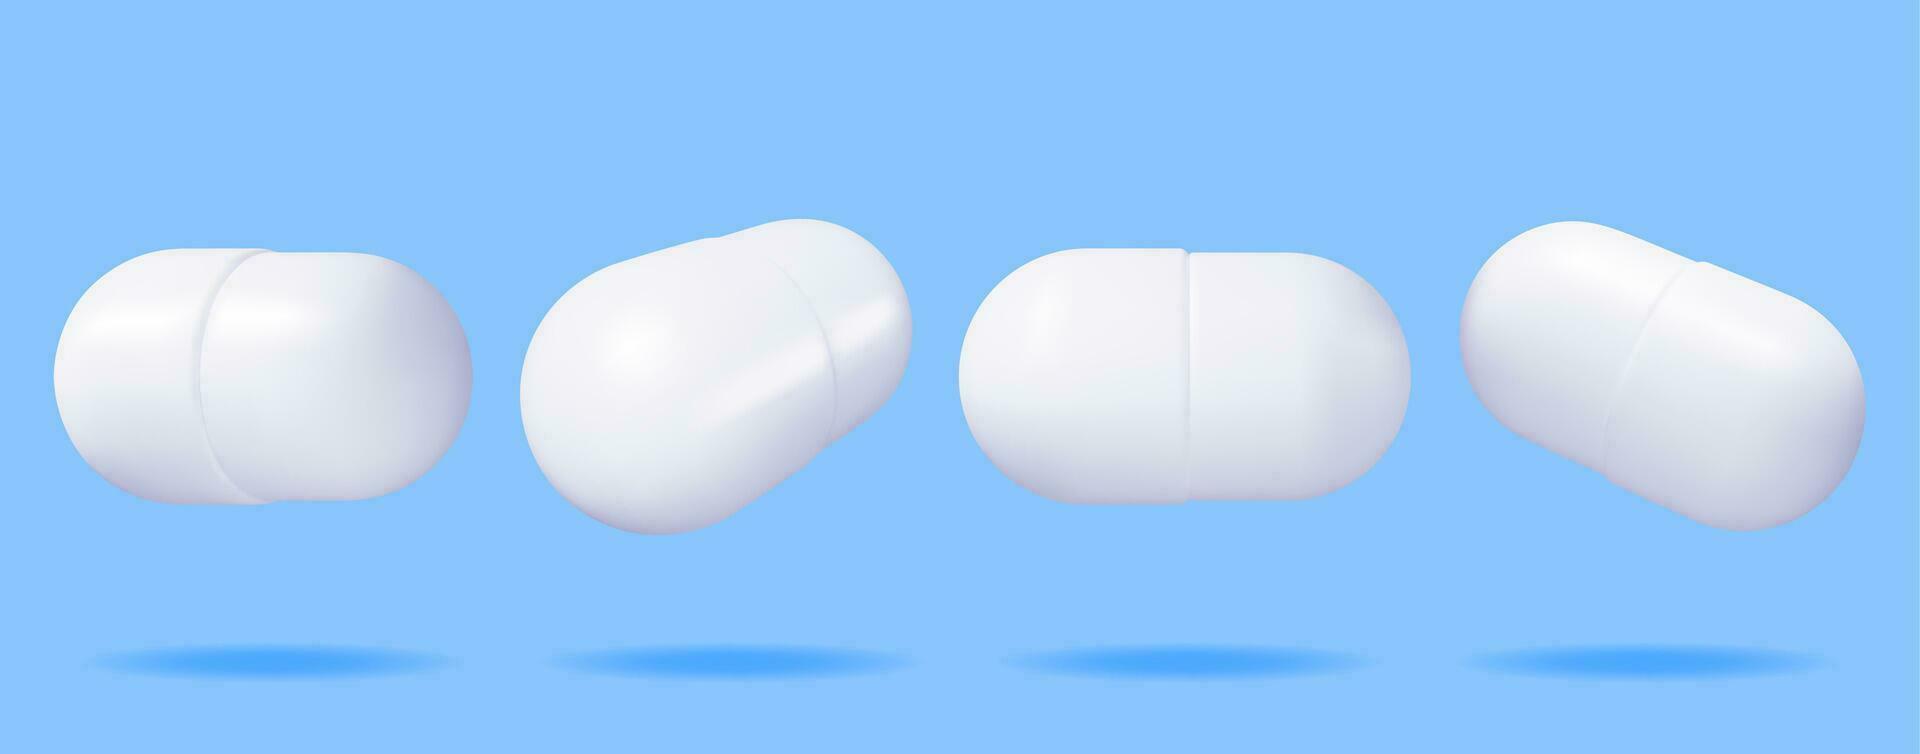 3D Classic Capsule Pills from Different Angles Collection. Render Capsule Tablets Set. Pill for Illness and Pain Treatment. Medical Drug, Vitamin, Antibiotic. Healthcare Pharmacy. Vector Illustration